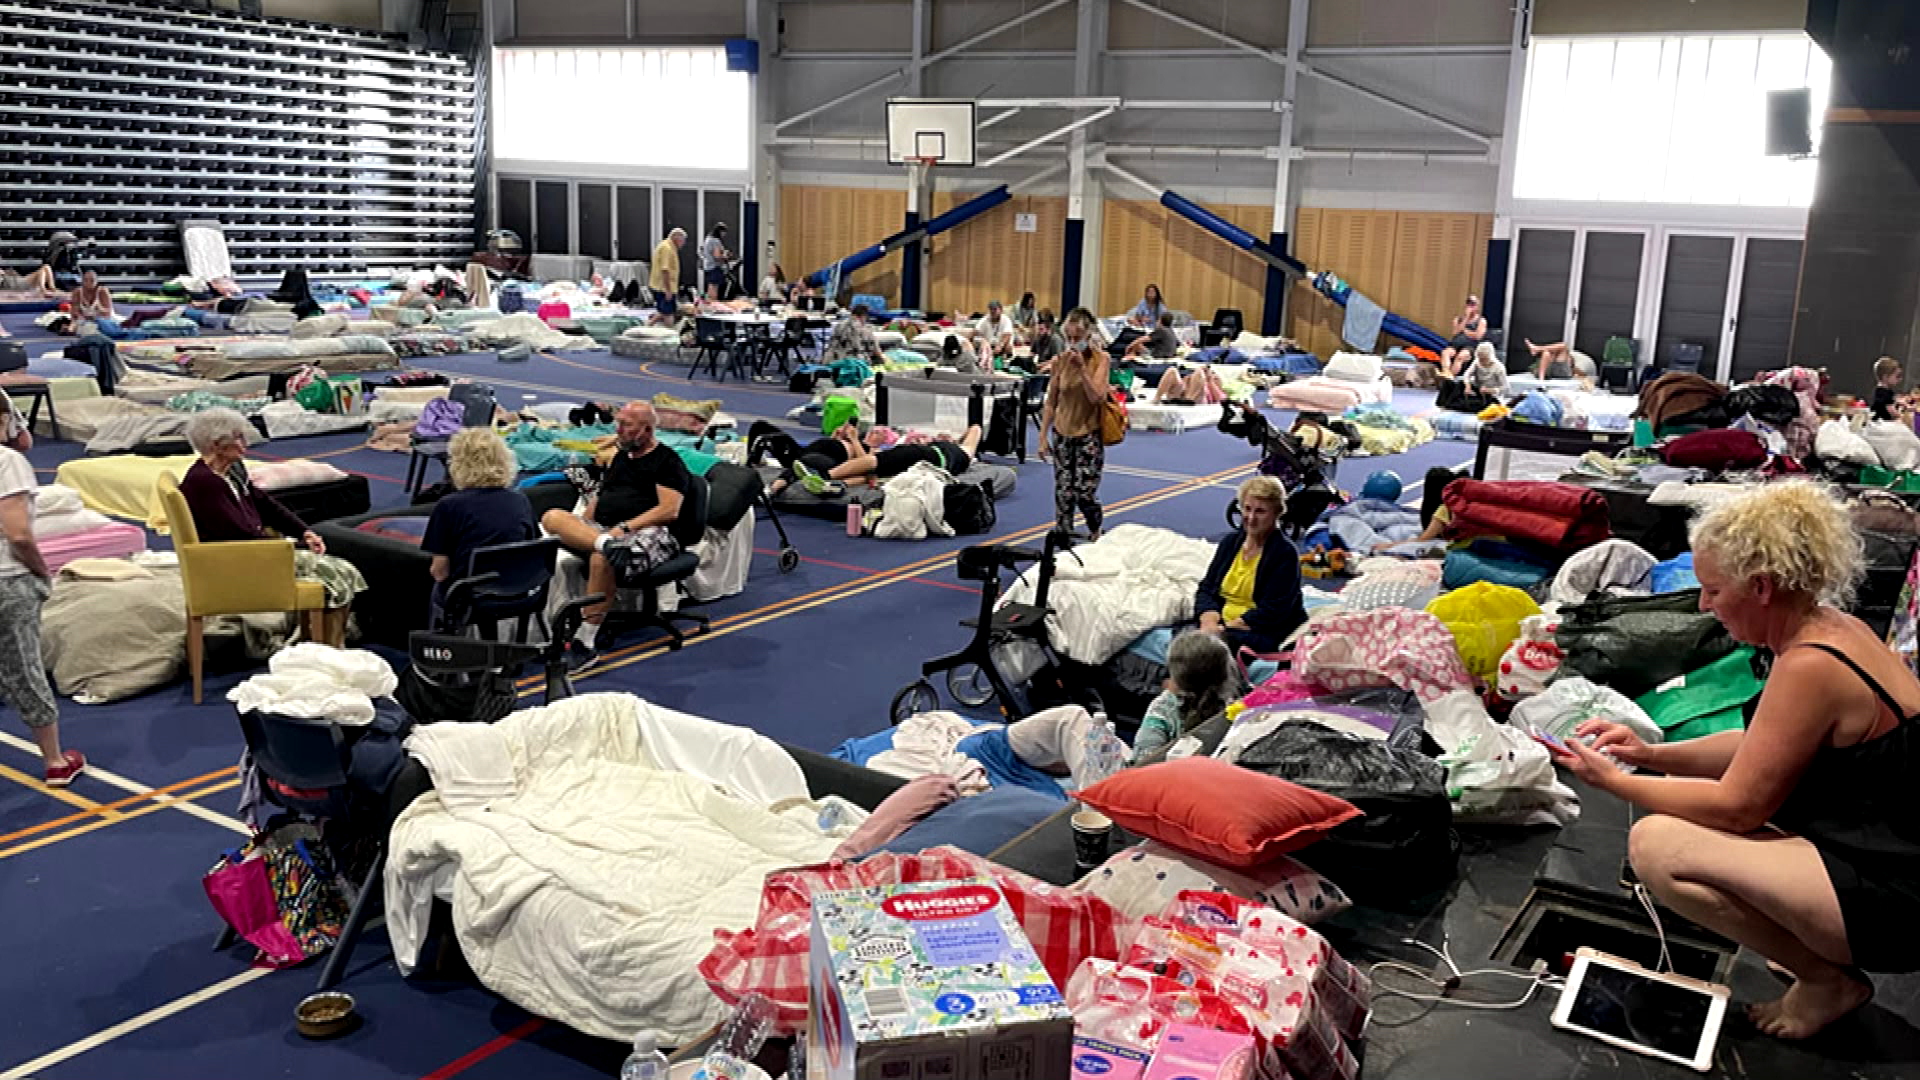 Evacuation centre during floods in Ballina